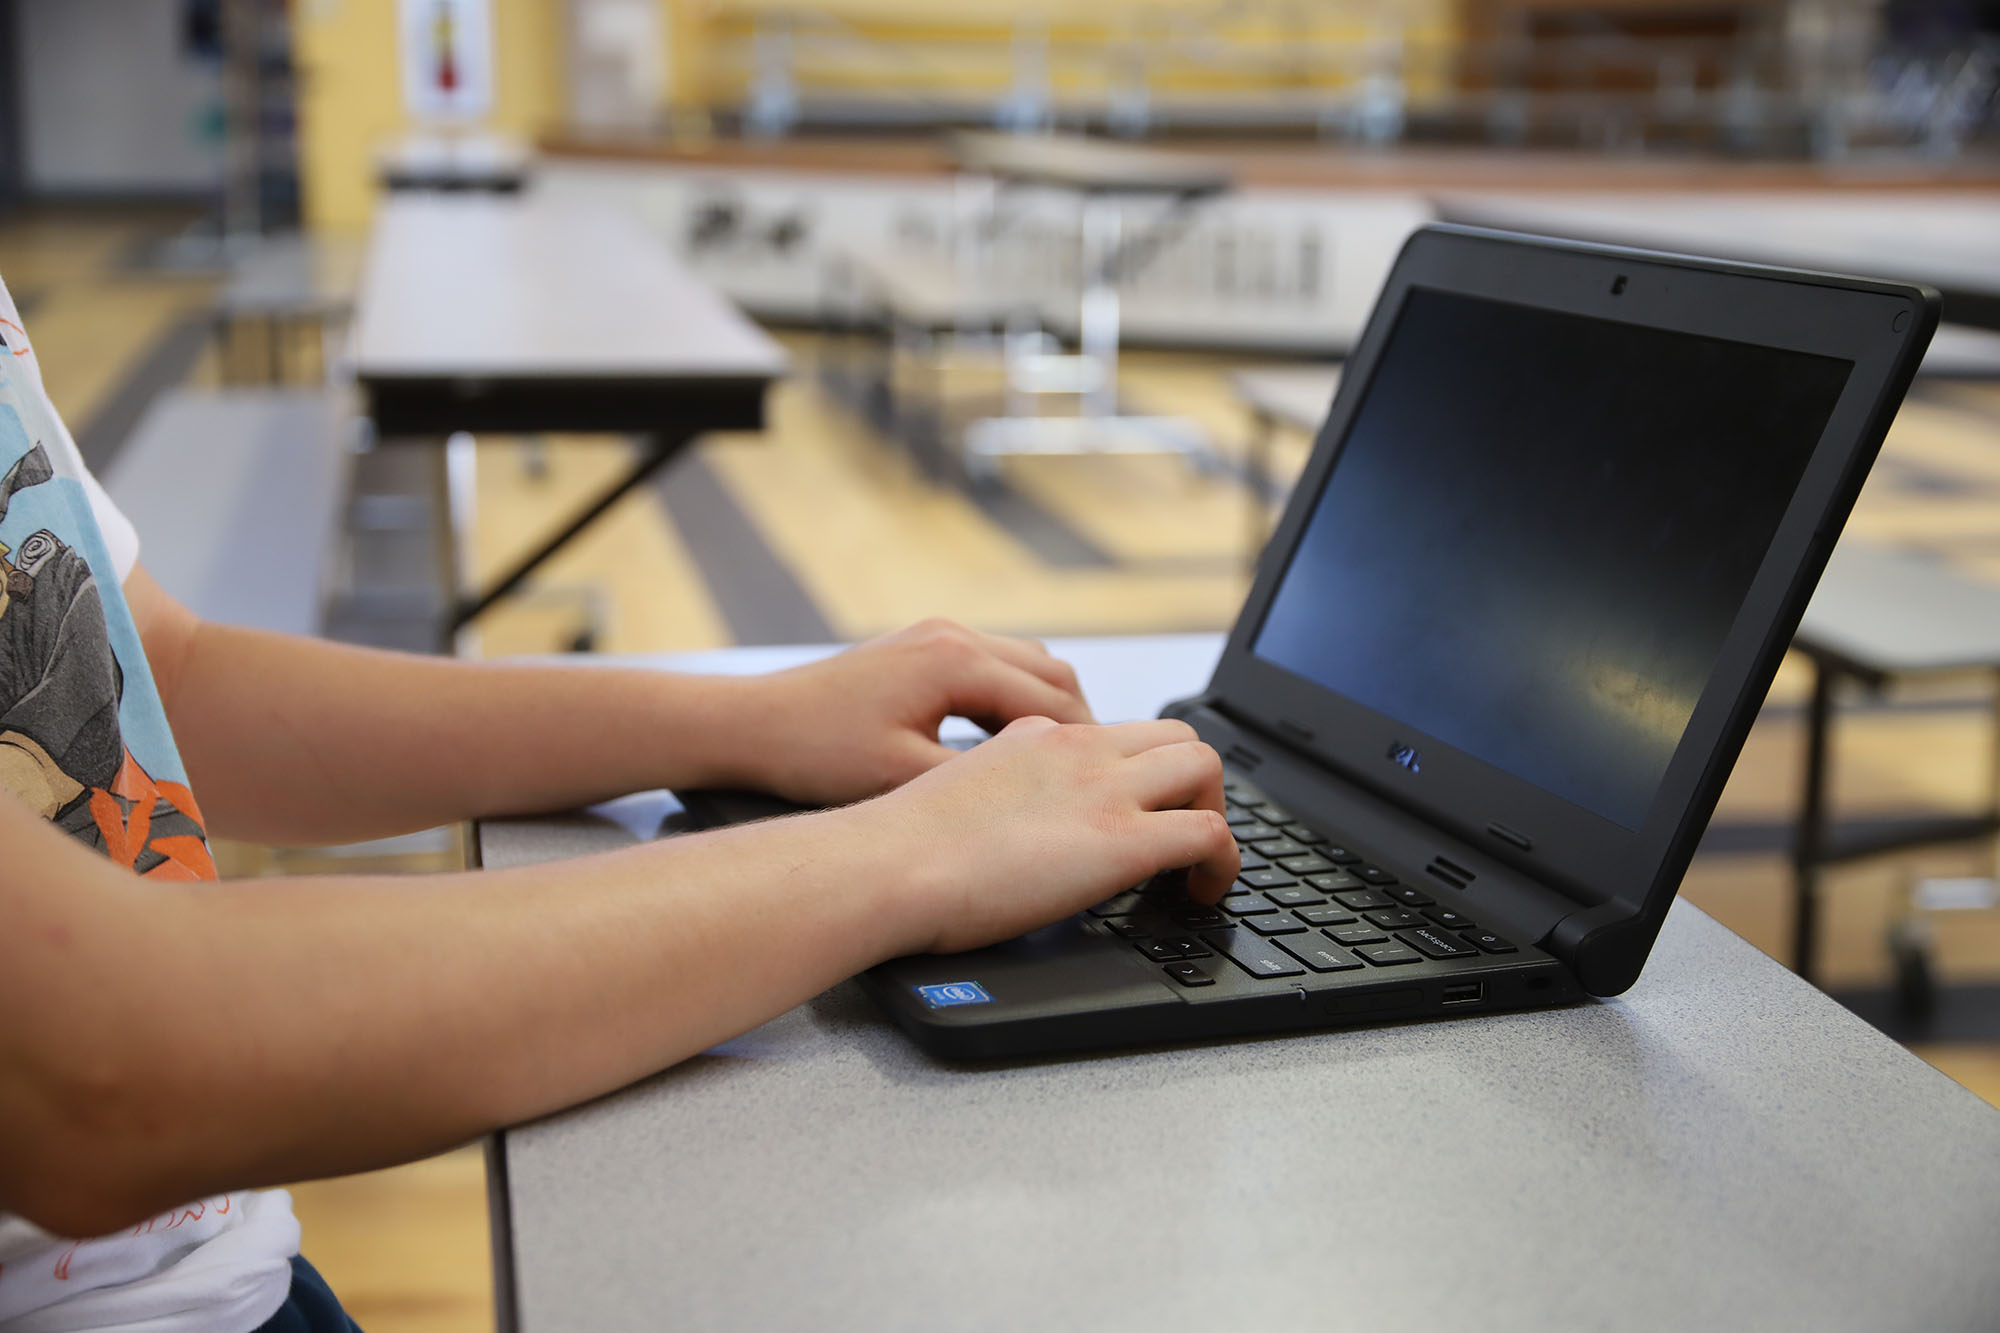 Student hands shown actively working on a Chromebook at school.